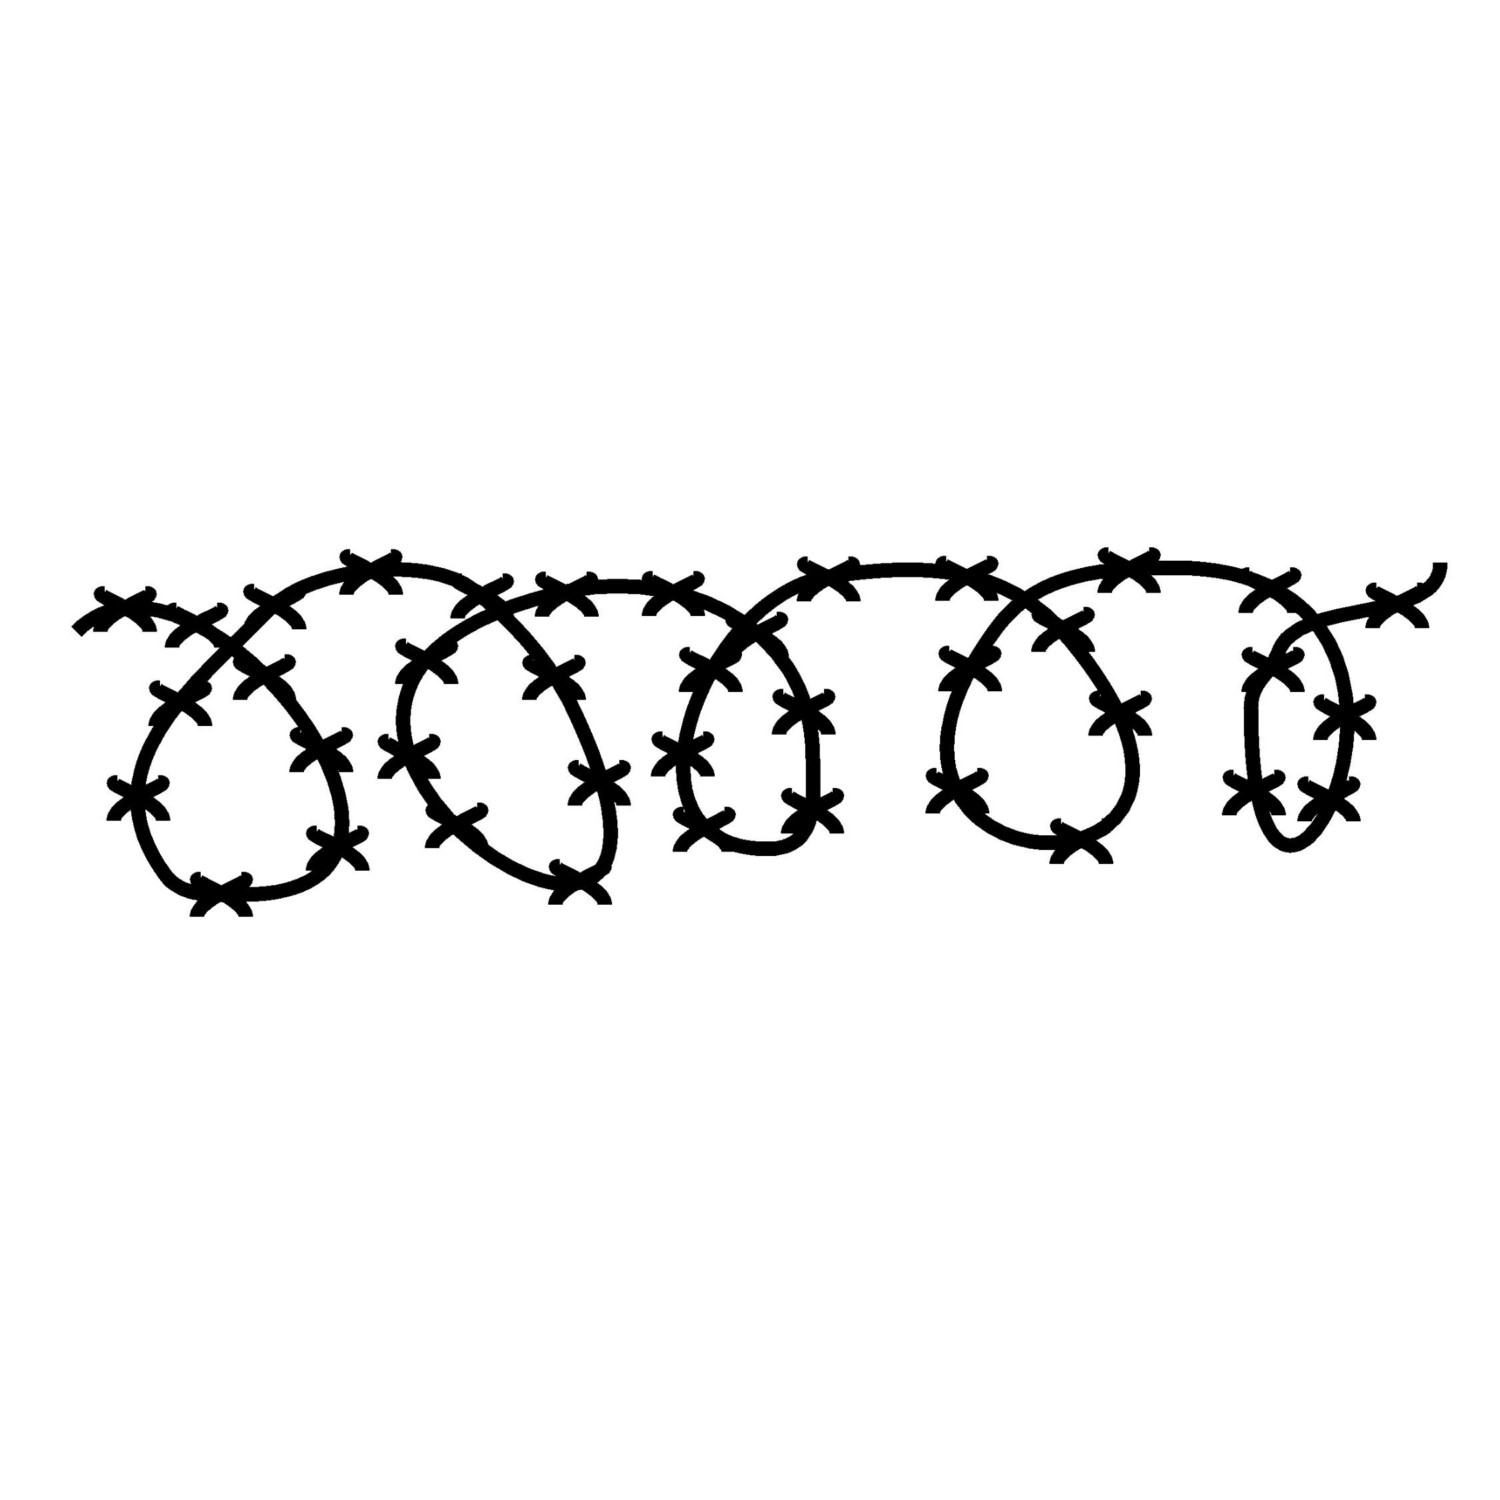 How To Draw Barbed Wire - ClipArt Best